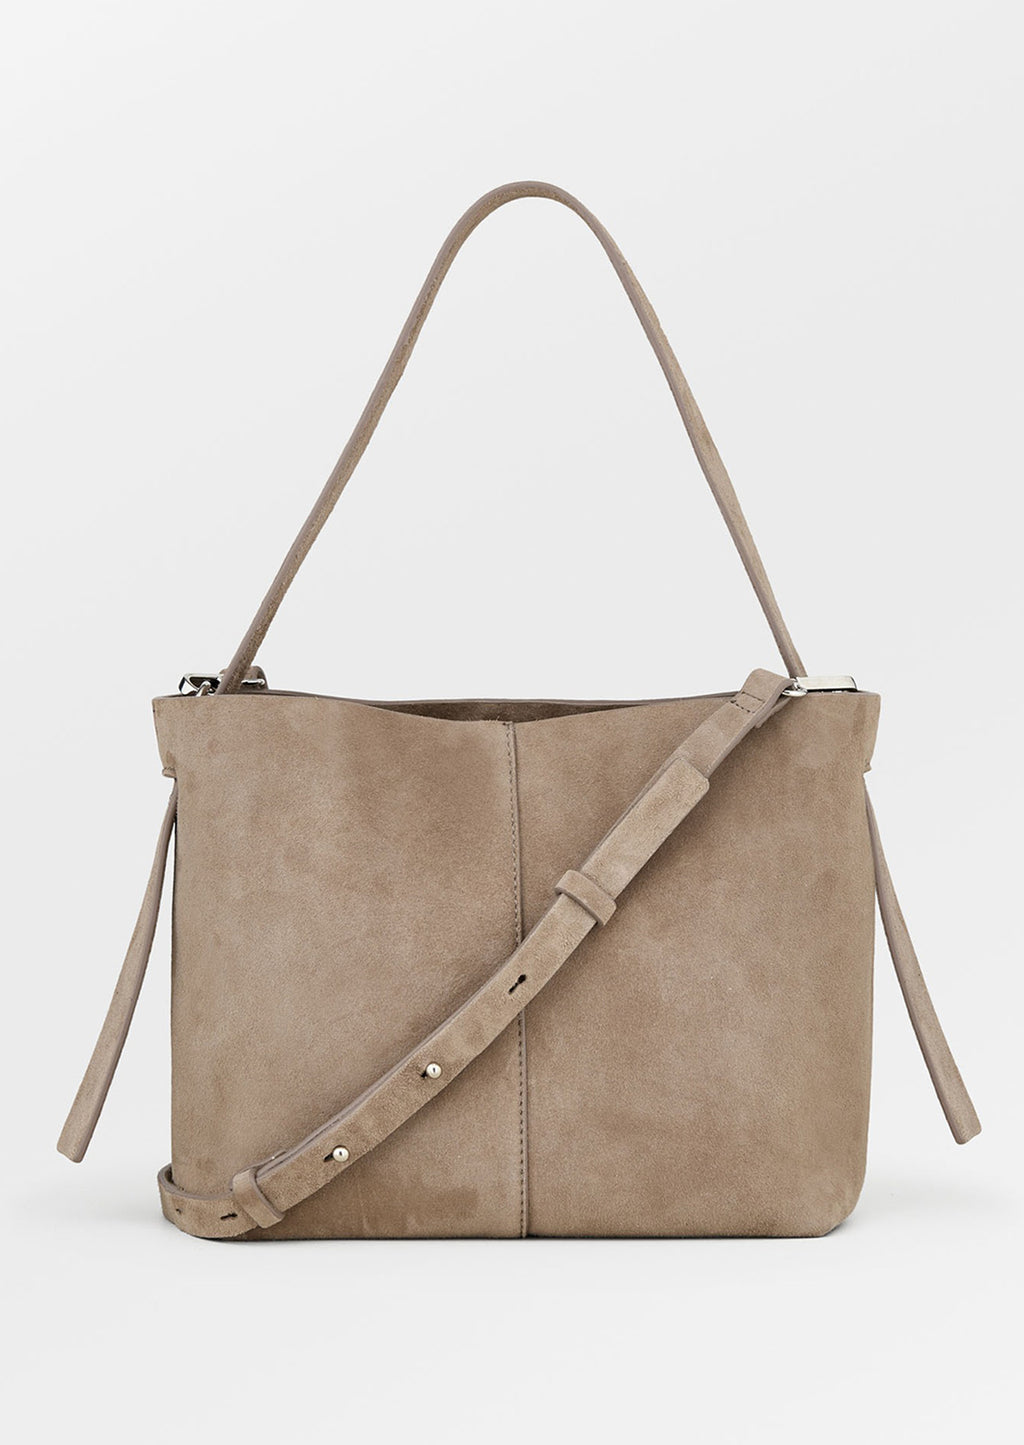 Mouse: A suede handbag in mouse grey.